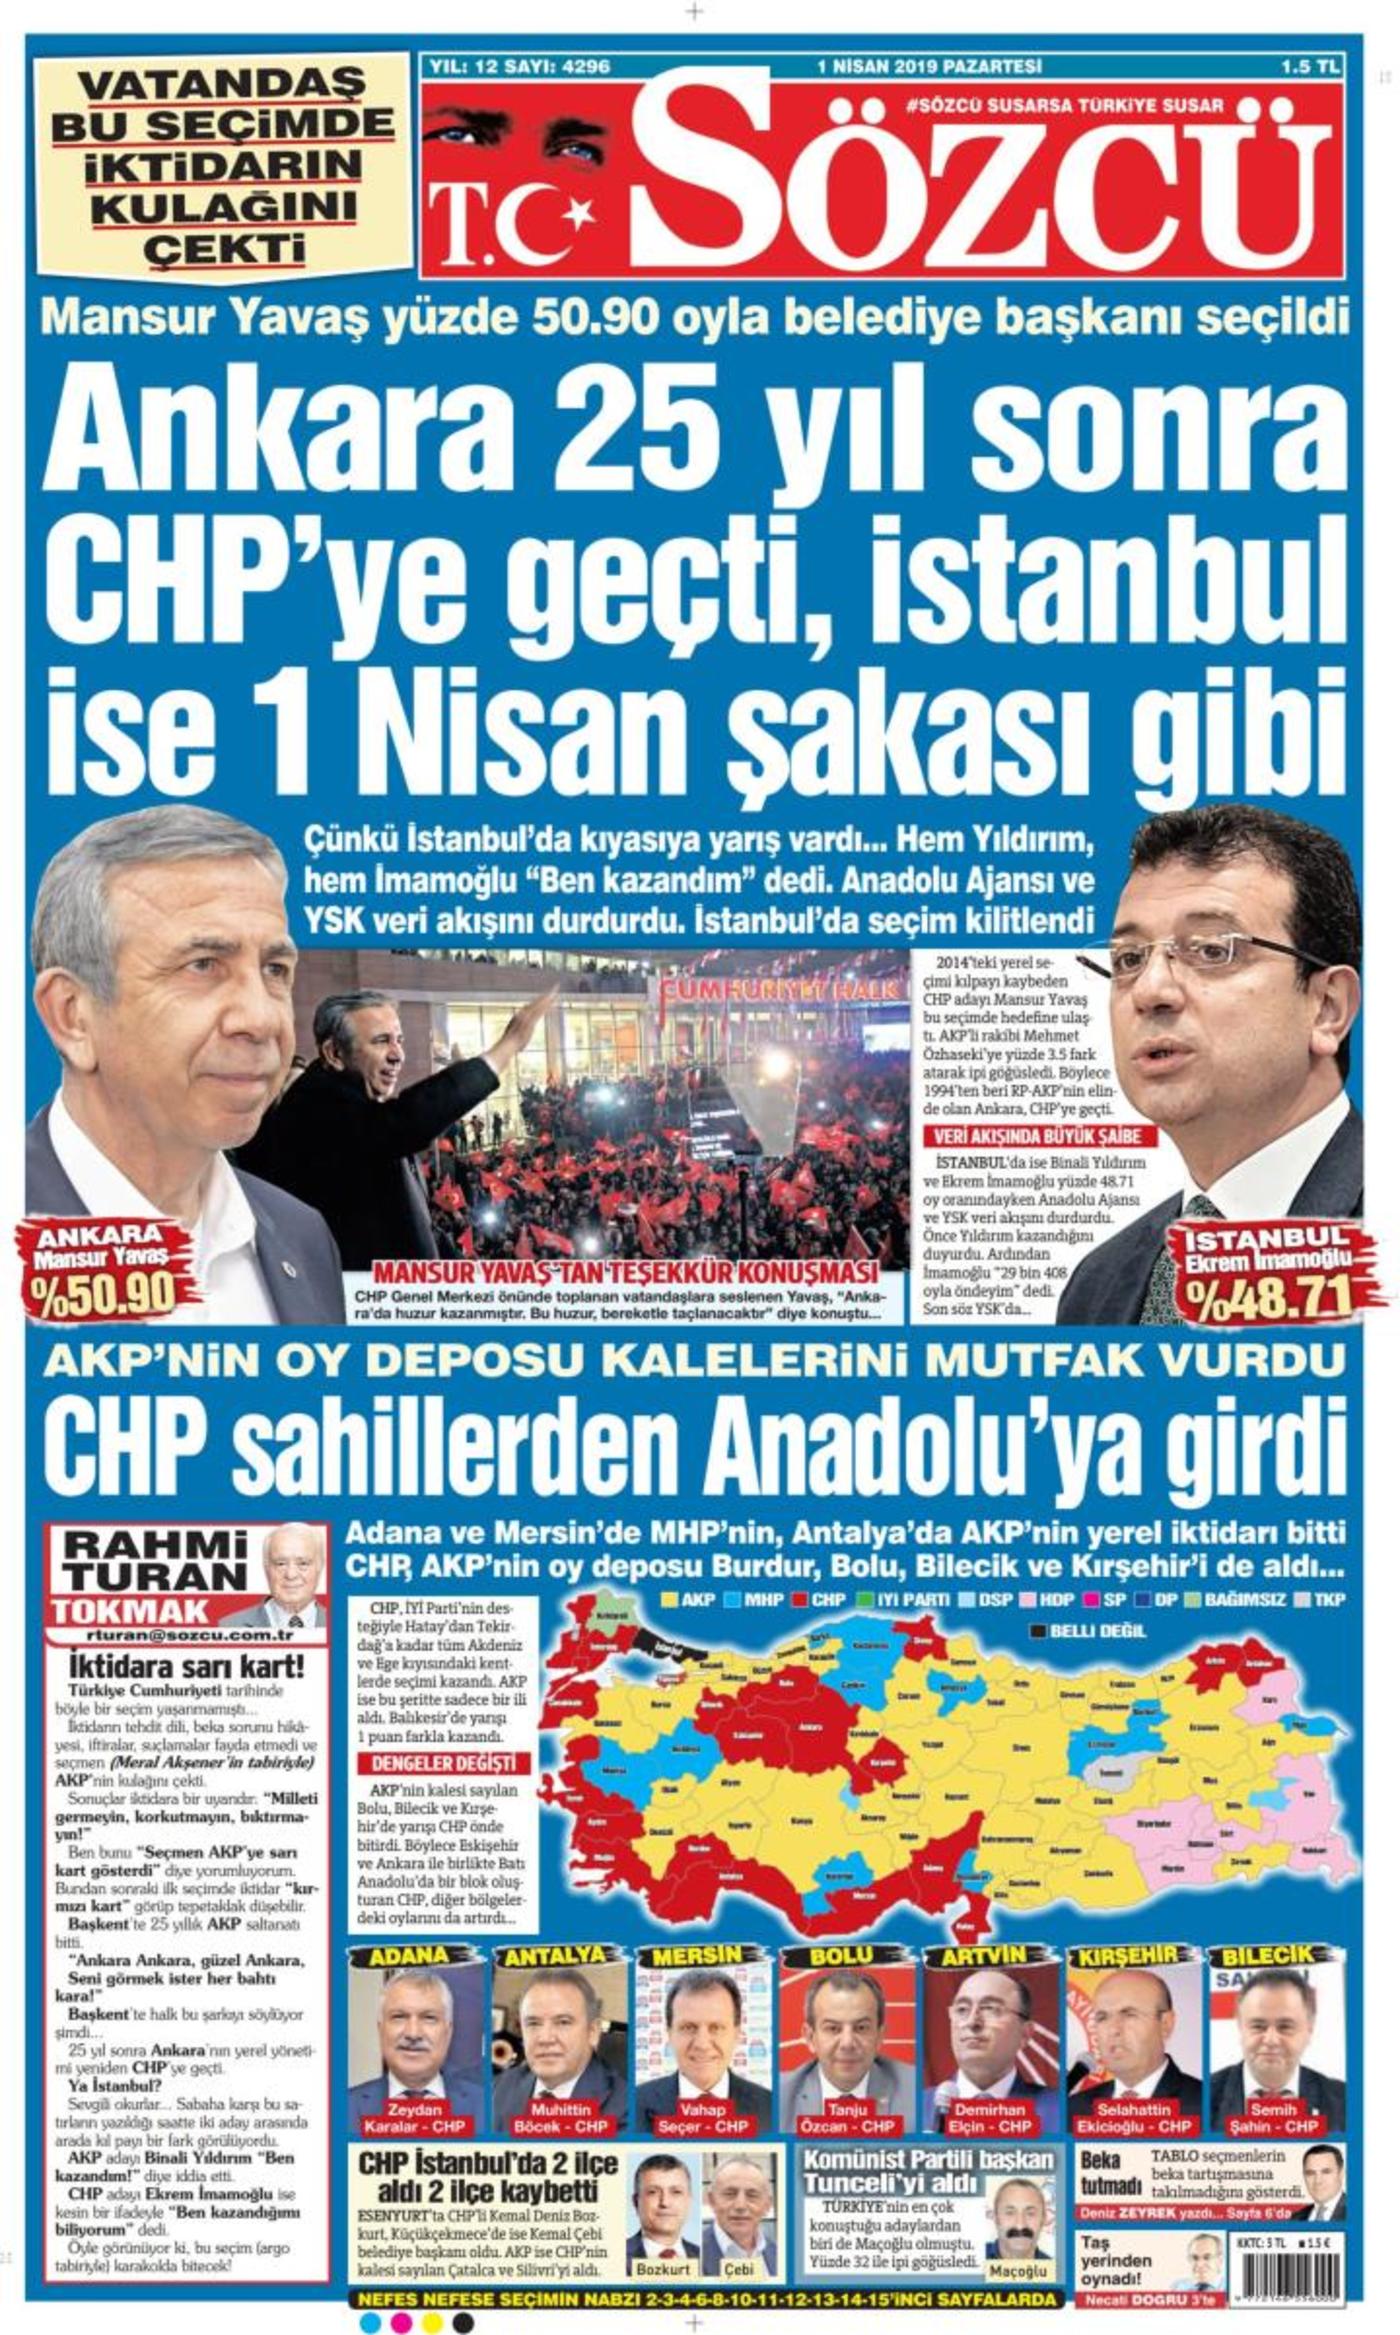 Sozcu daily front page following local elections in Turkey